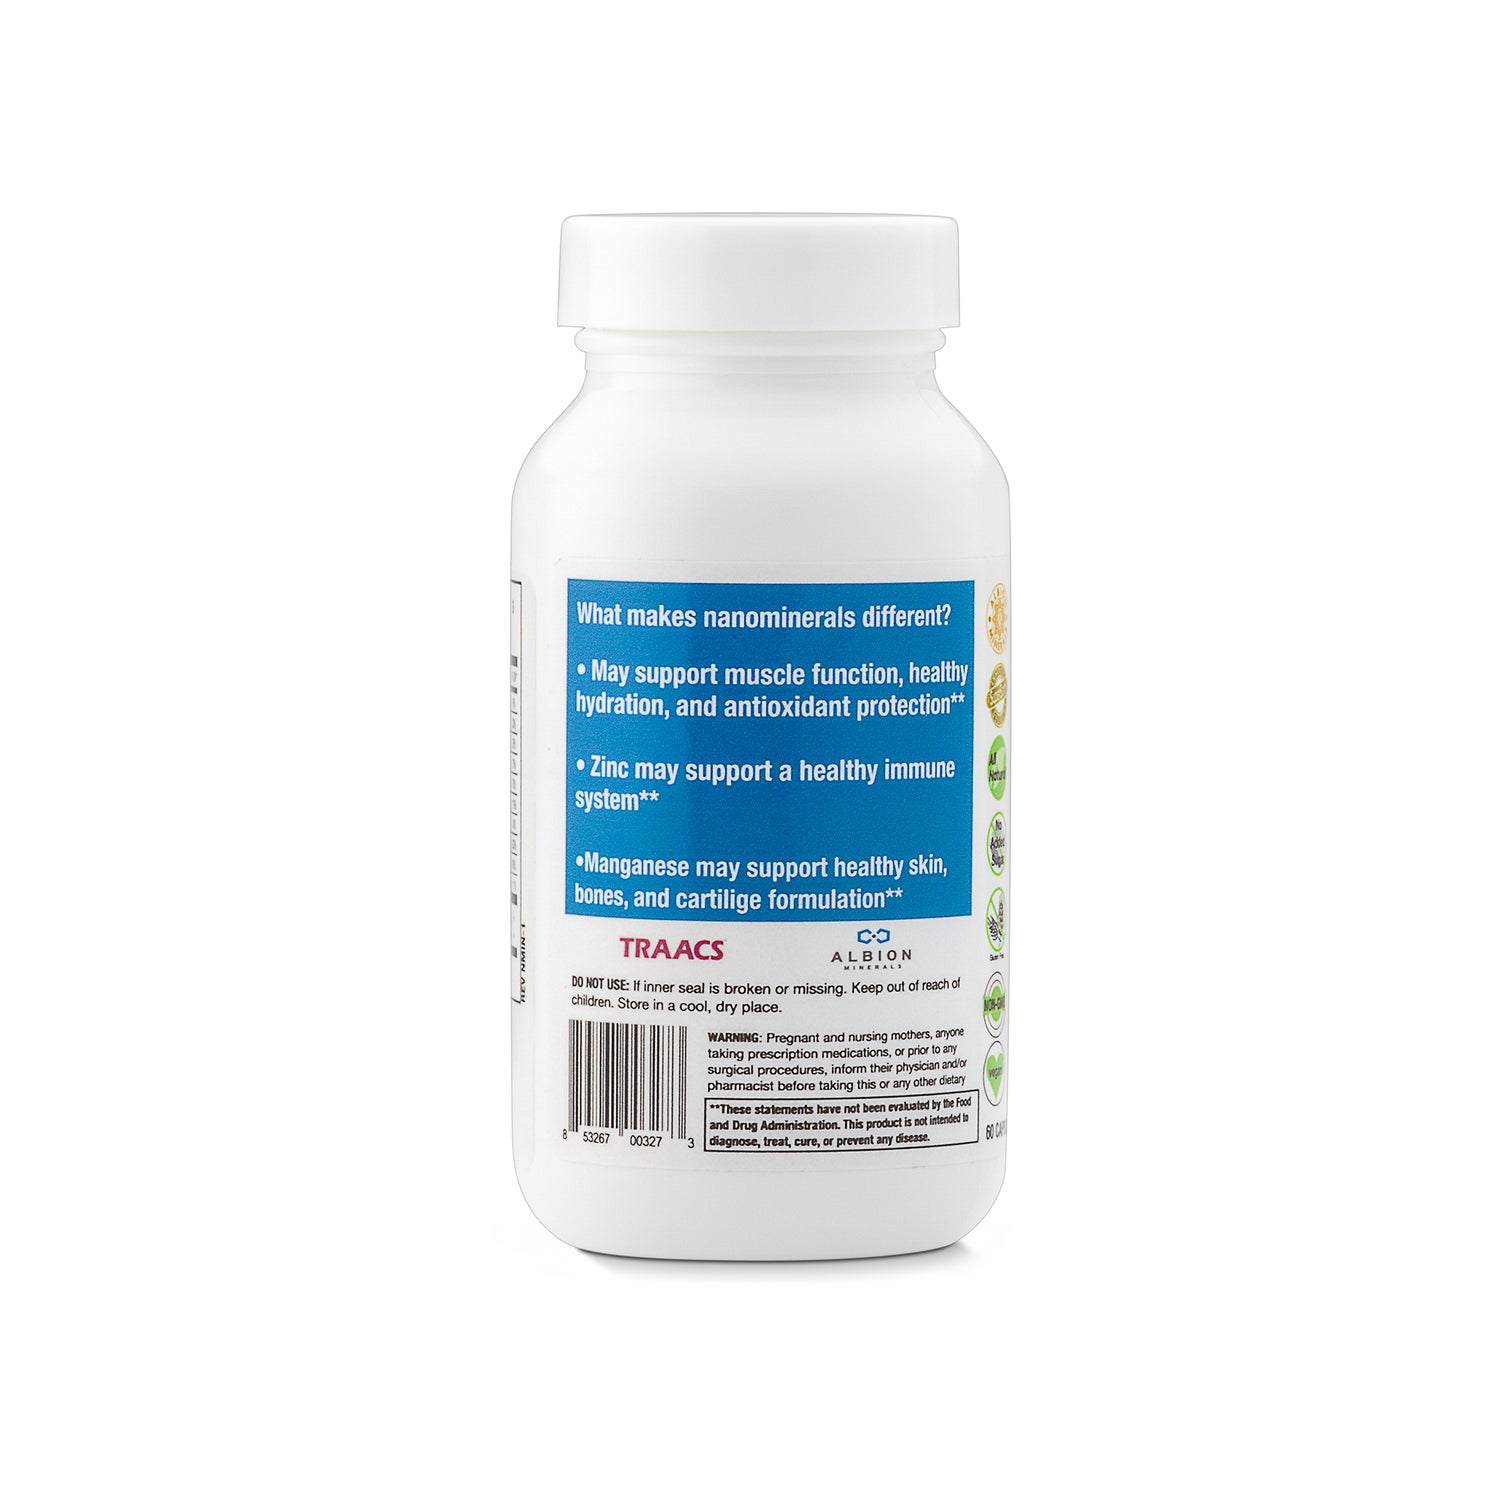 nanominerals complete chelated multi mineral supplement capsule - health benefits